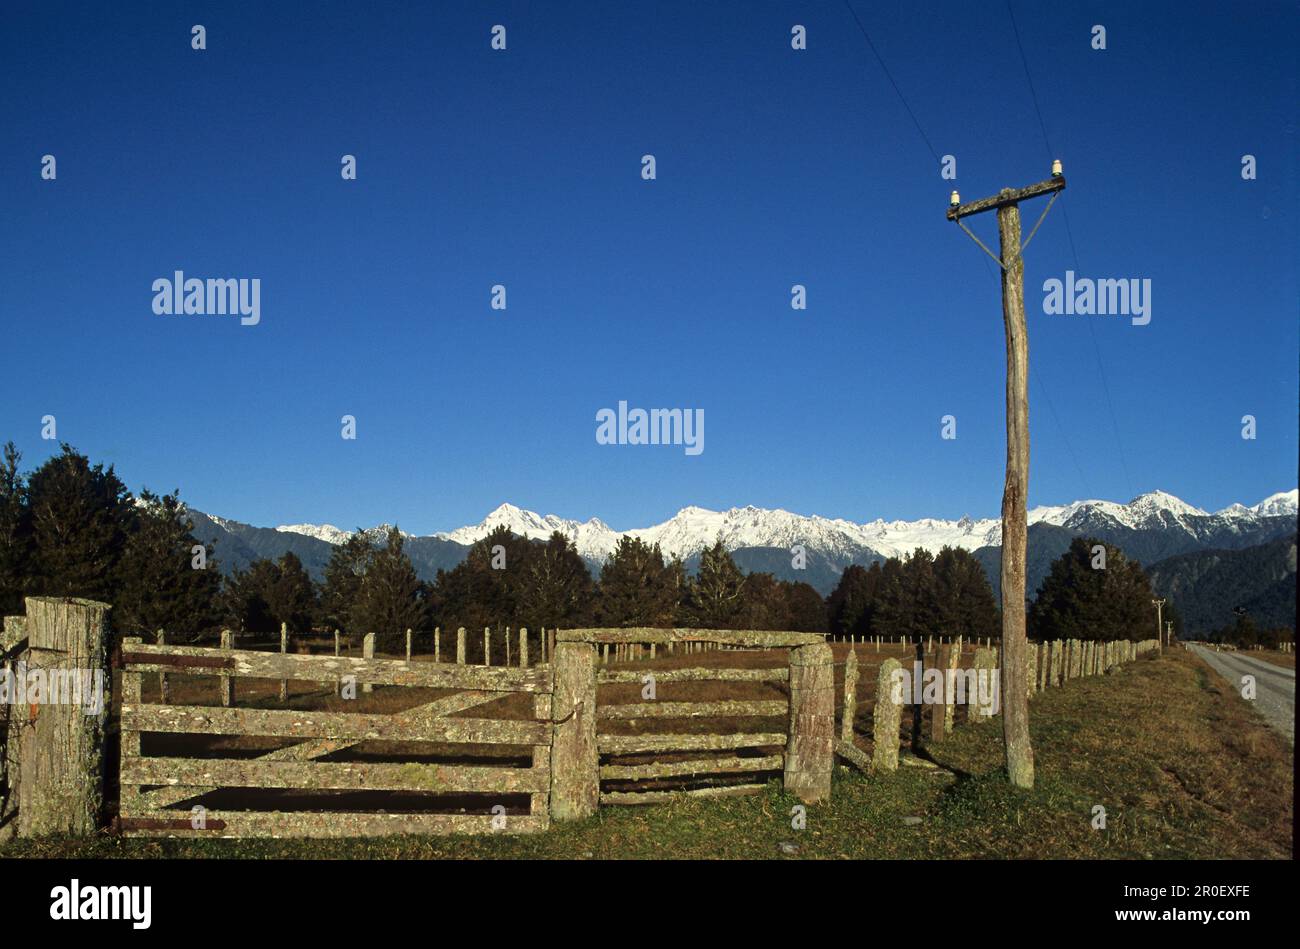 View of weathered fence in front of snow covered Southern Alps, West Coast, South Island, New Zealand, Oceania Stock Photo